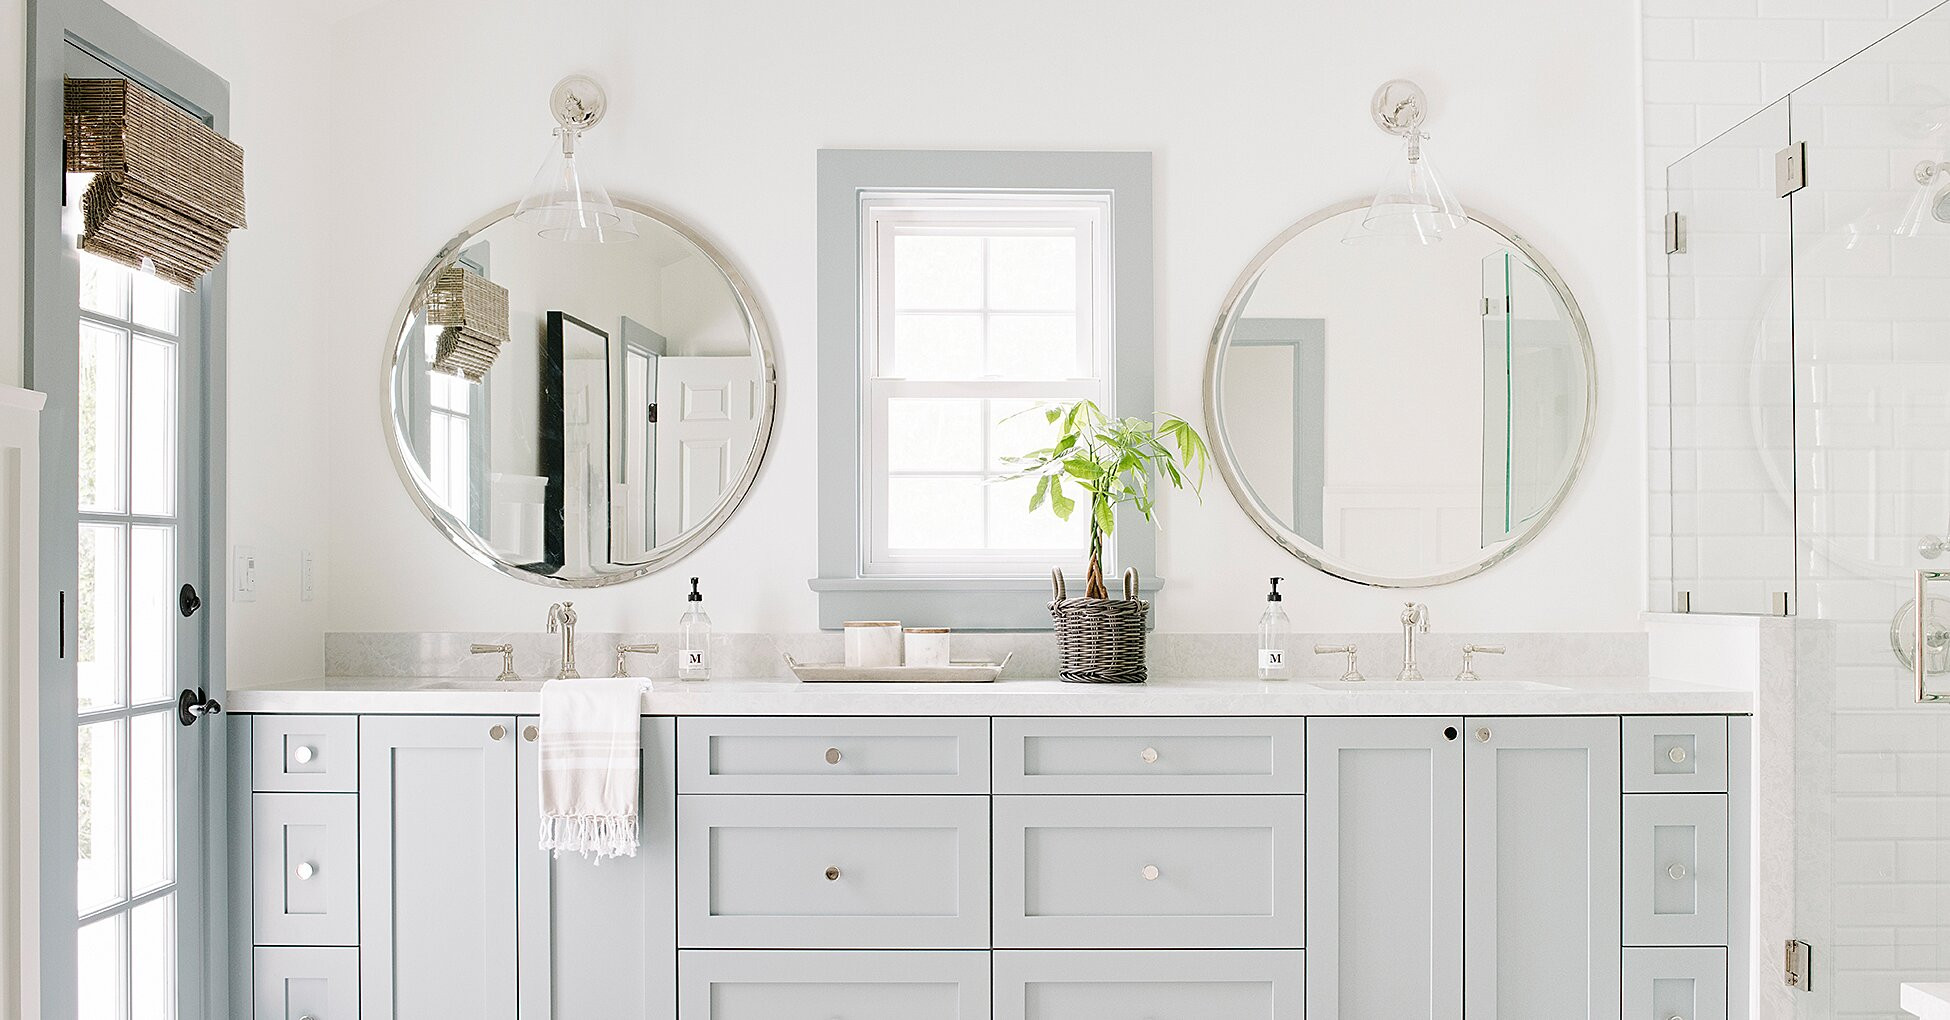 Top Bathroom Colors
 These Are the Most Popular Bathroom Paint Colors for 2020